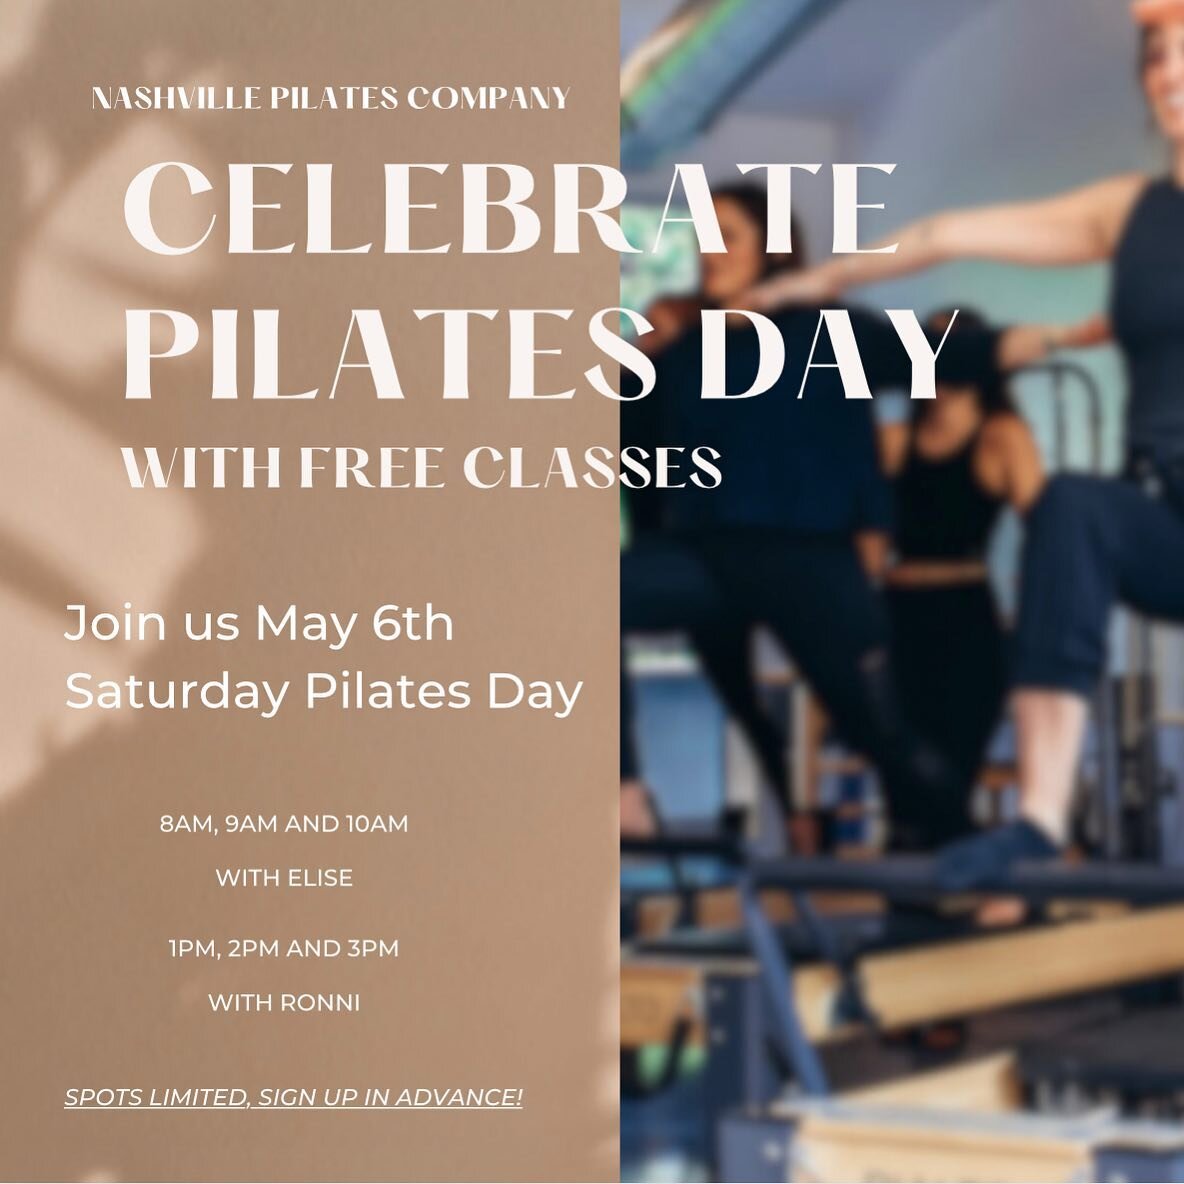 May 6th Saturday is Pilates Day. To celebrate we are offering FREE classes all day! 

Spots are limited, sign up in advance! - Waitlist is open :)

Sign up like you would for any of our other classes.